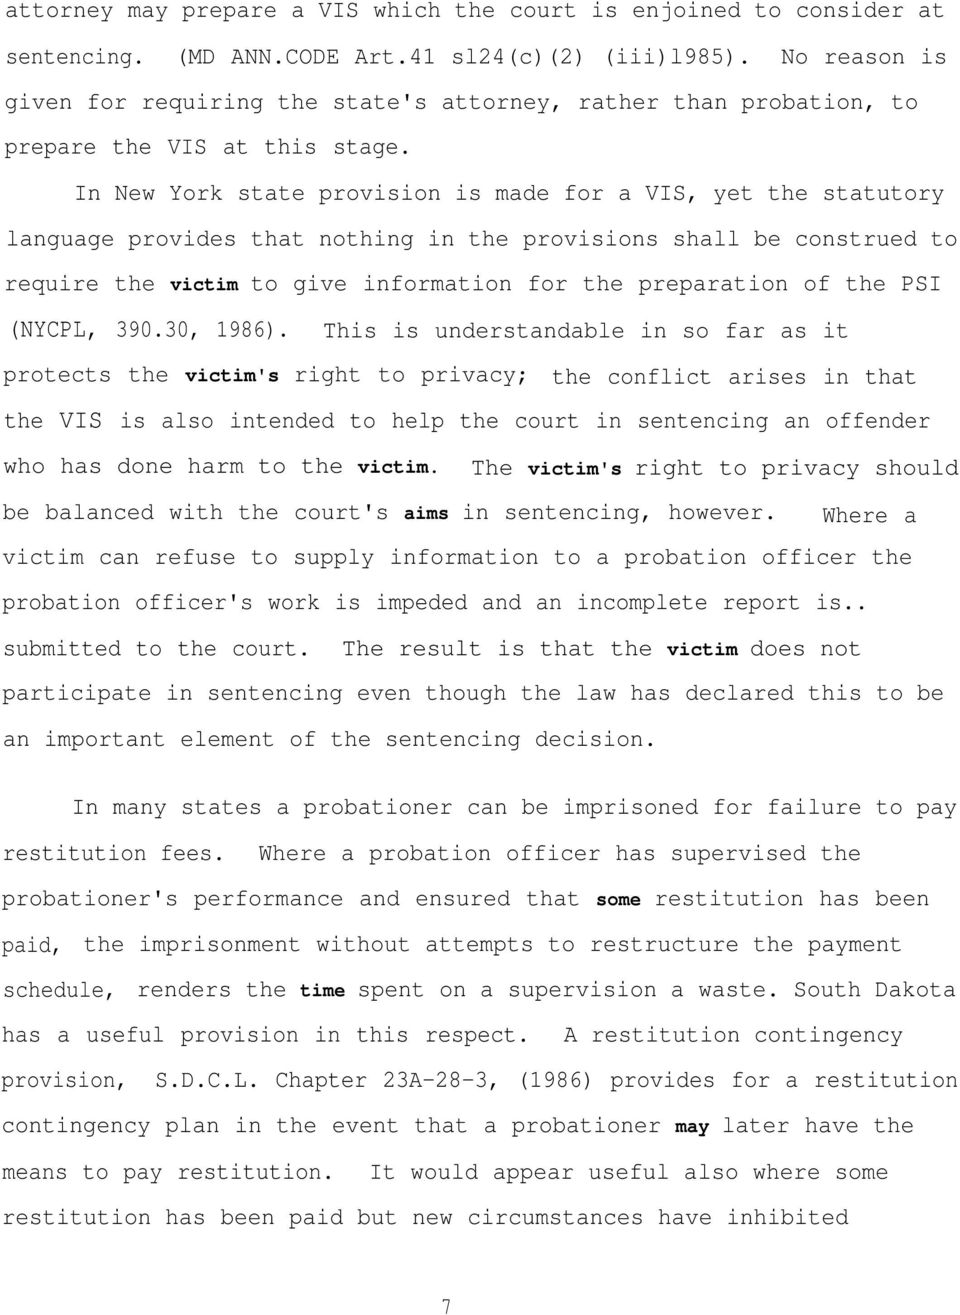 In New York state provision is made for a VIS, yet the statutory language provides that nothing in the provisions shall be construed to require the victim to give information for the preparation of